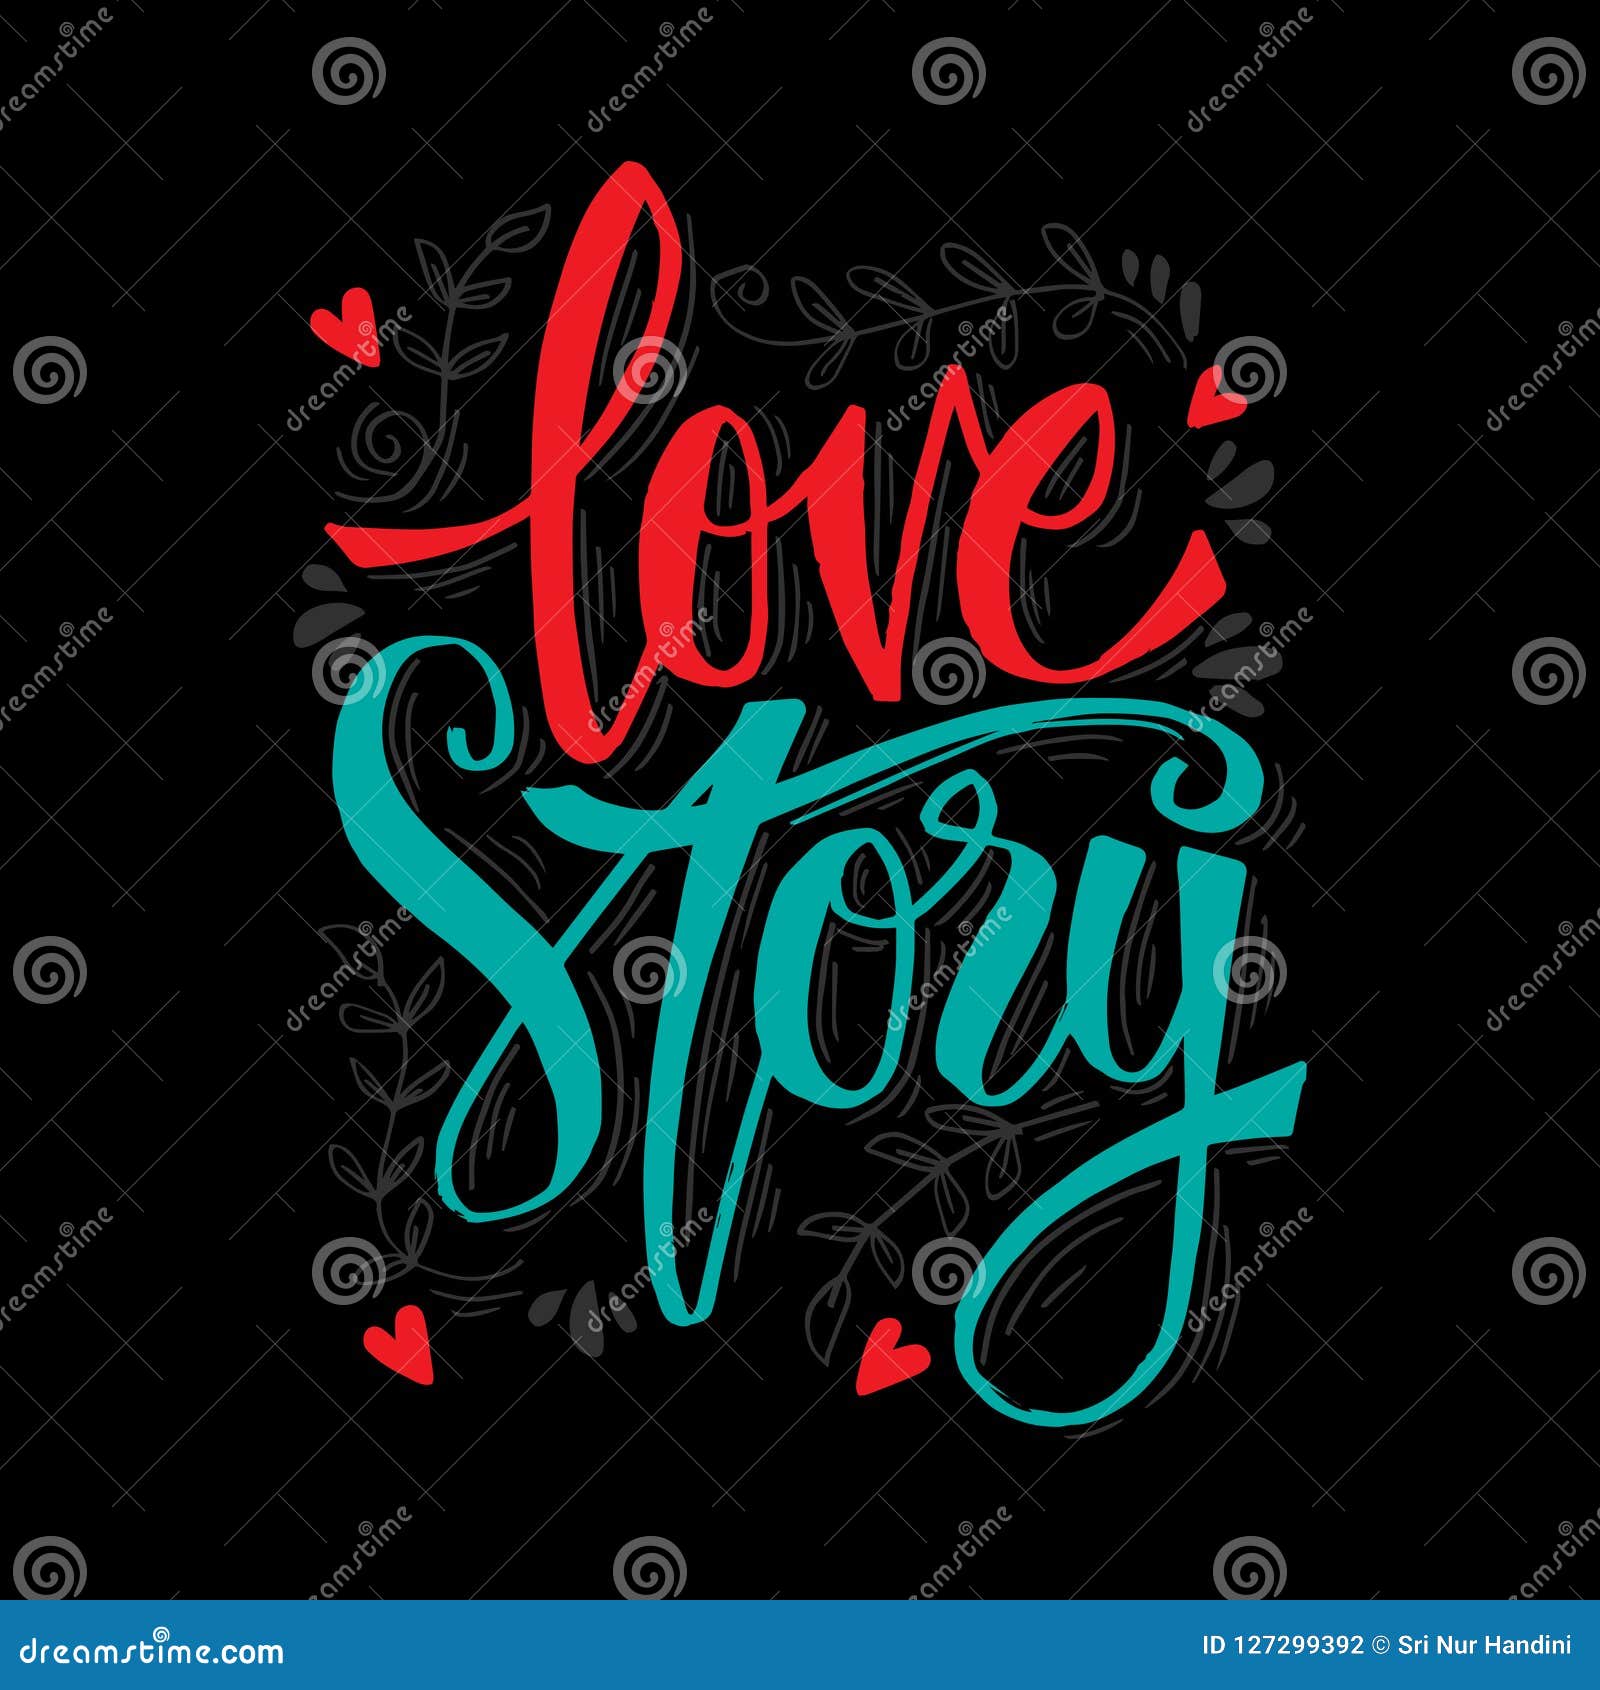 179314 Love Story Images Stock Photos  Vectors  Shutterstock